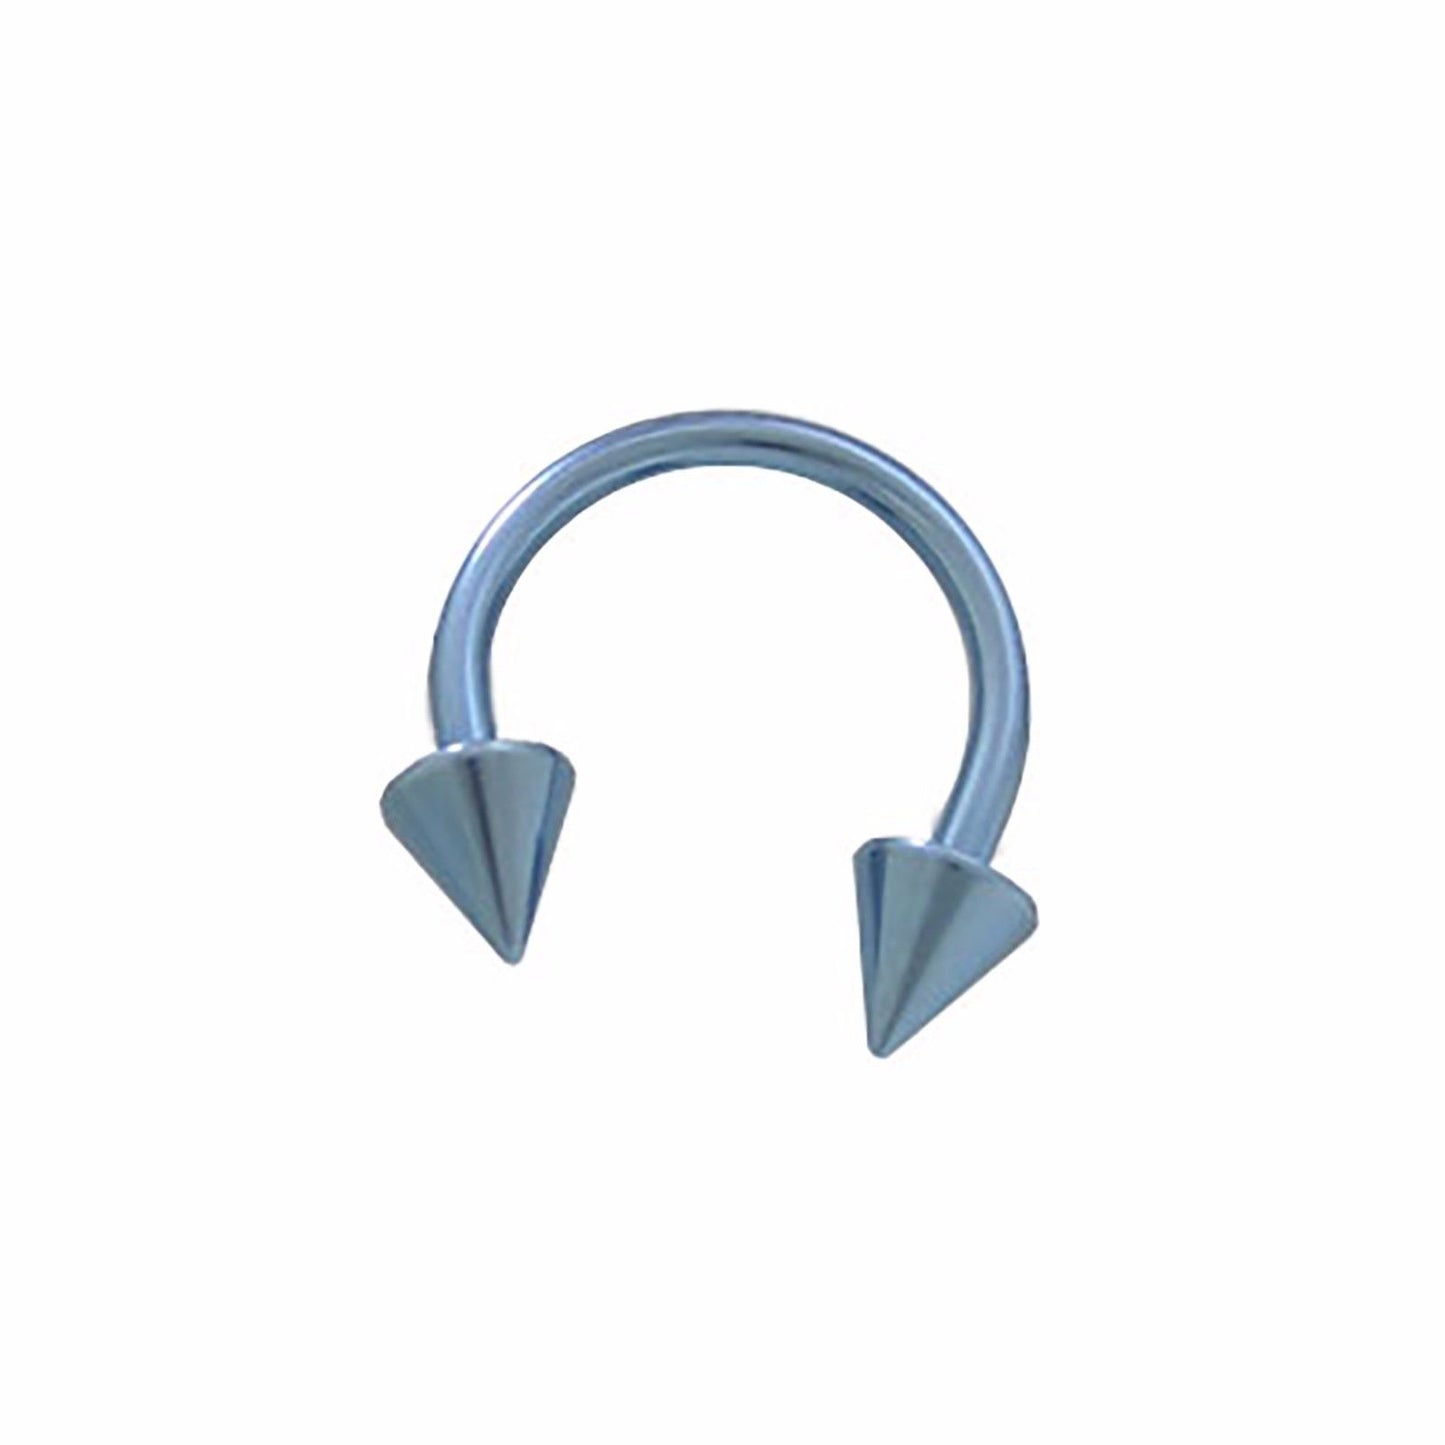 Light Blue 14G Titanium Horseshoe Circular Barbell Ring with 6MM Spike Beads